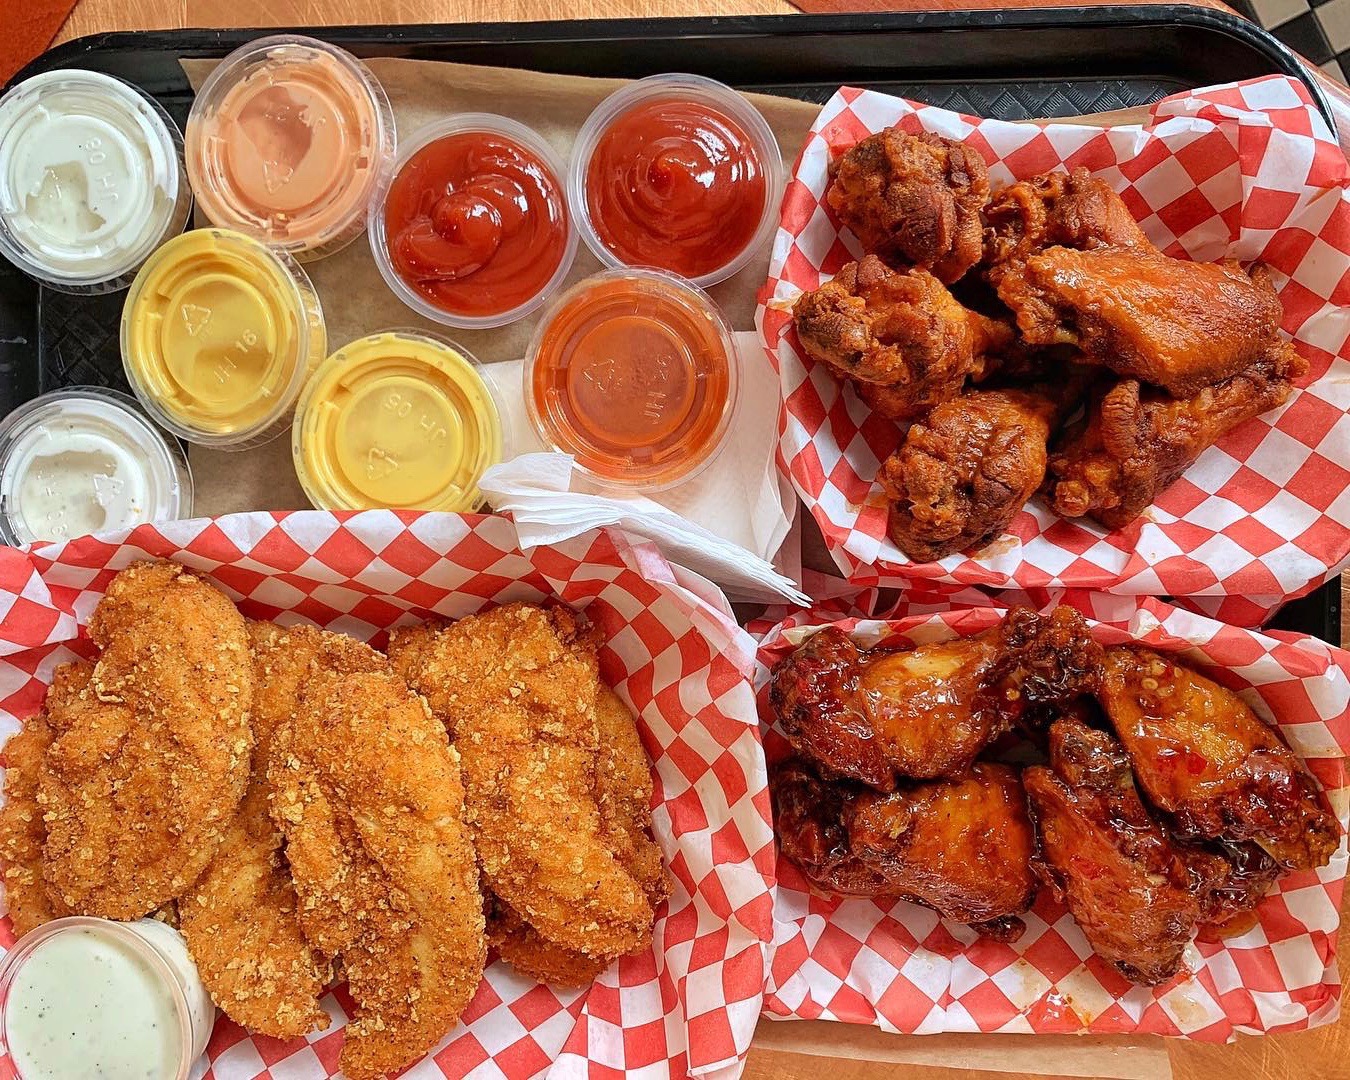 Mad Chicken sets sights on mid-November opening on East Side